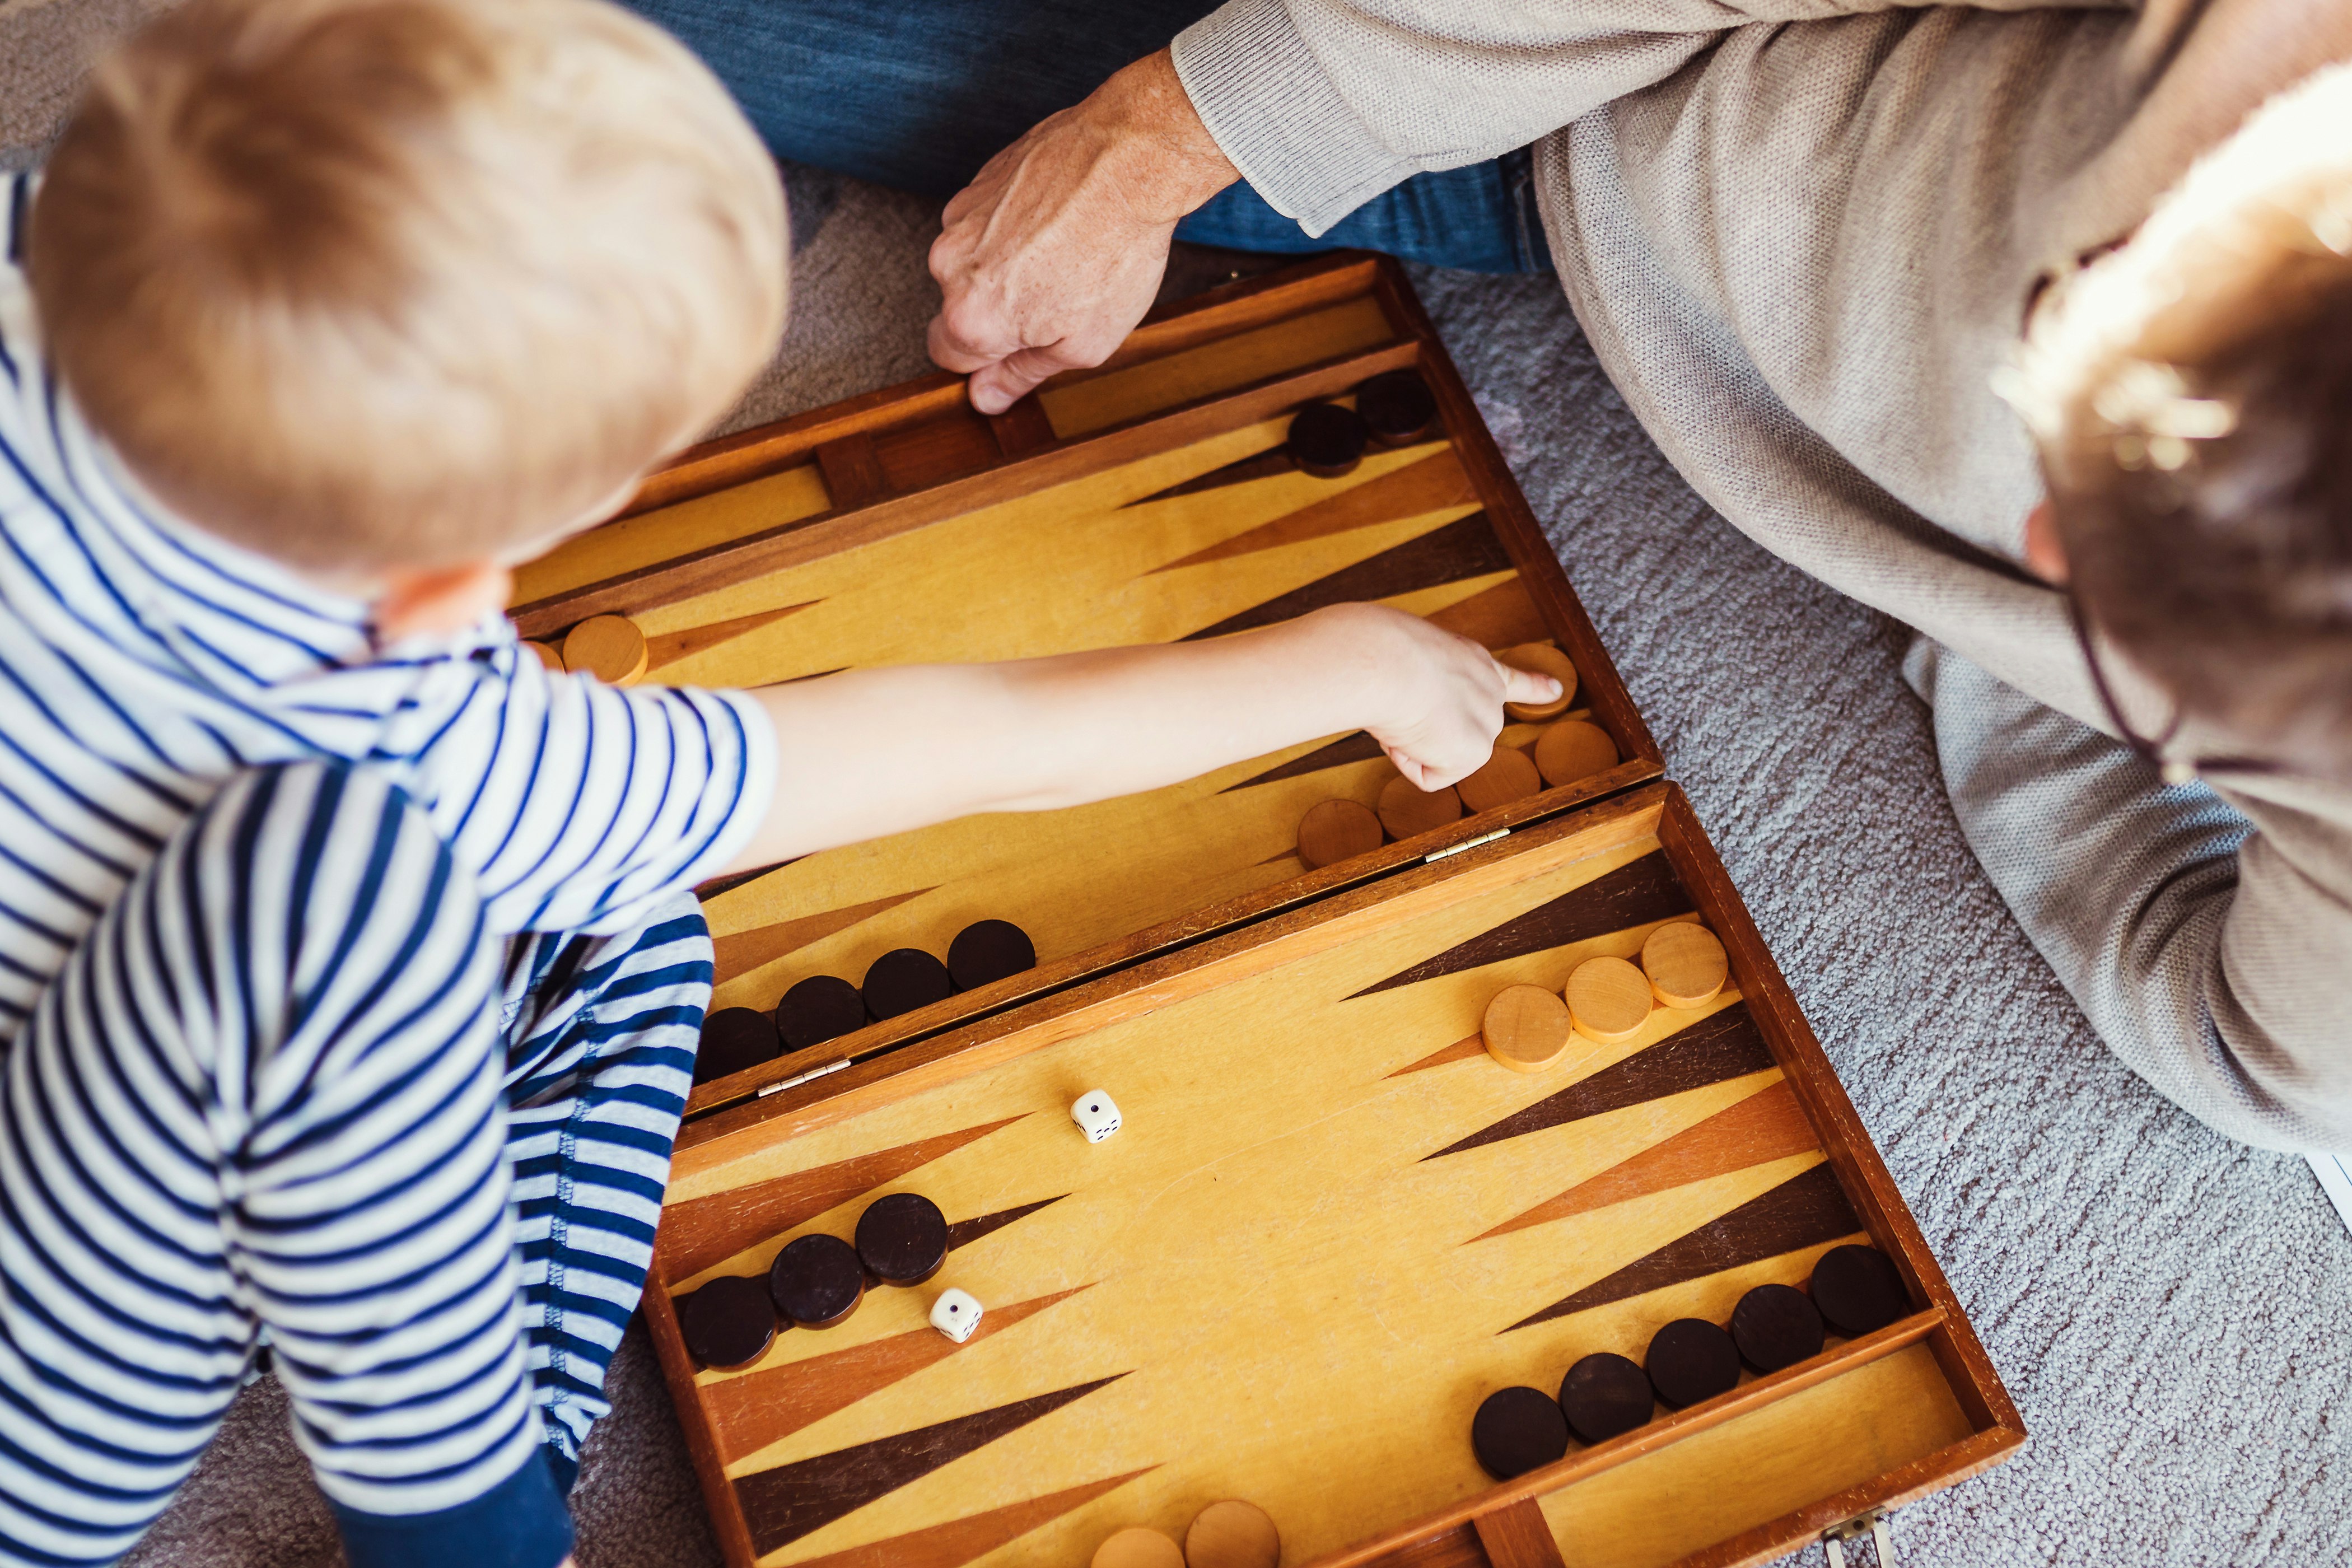 A young child is playing backgammon on the floor with their parent; the child is moving one of the pieces on the board.